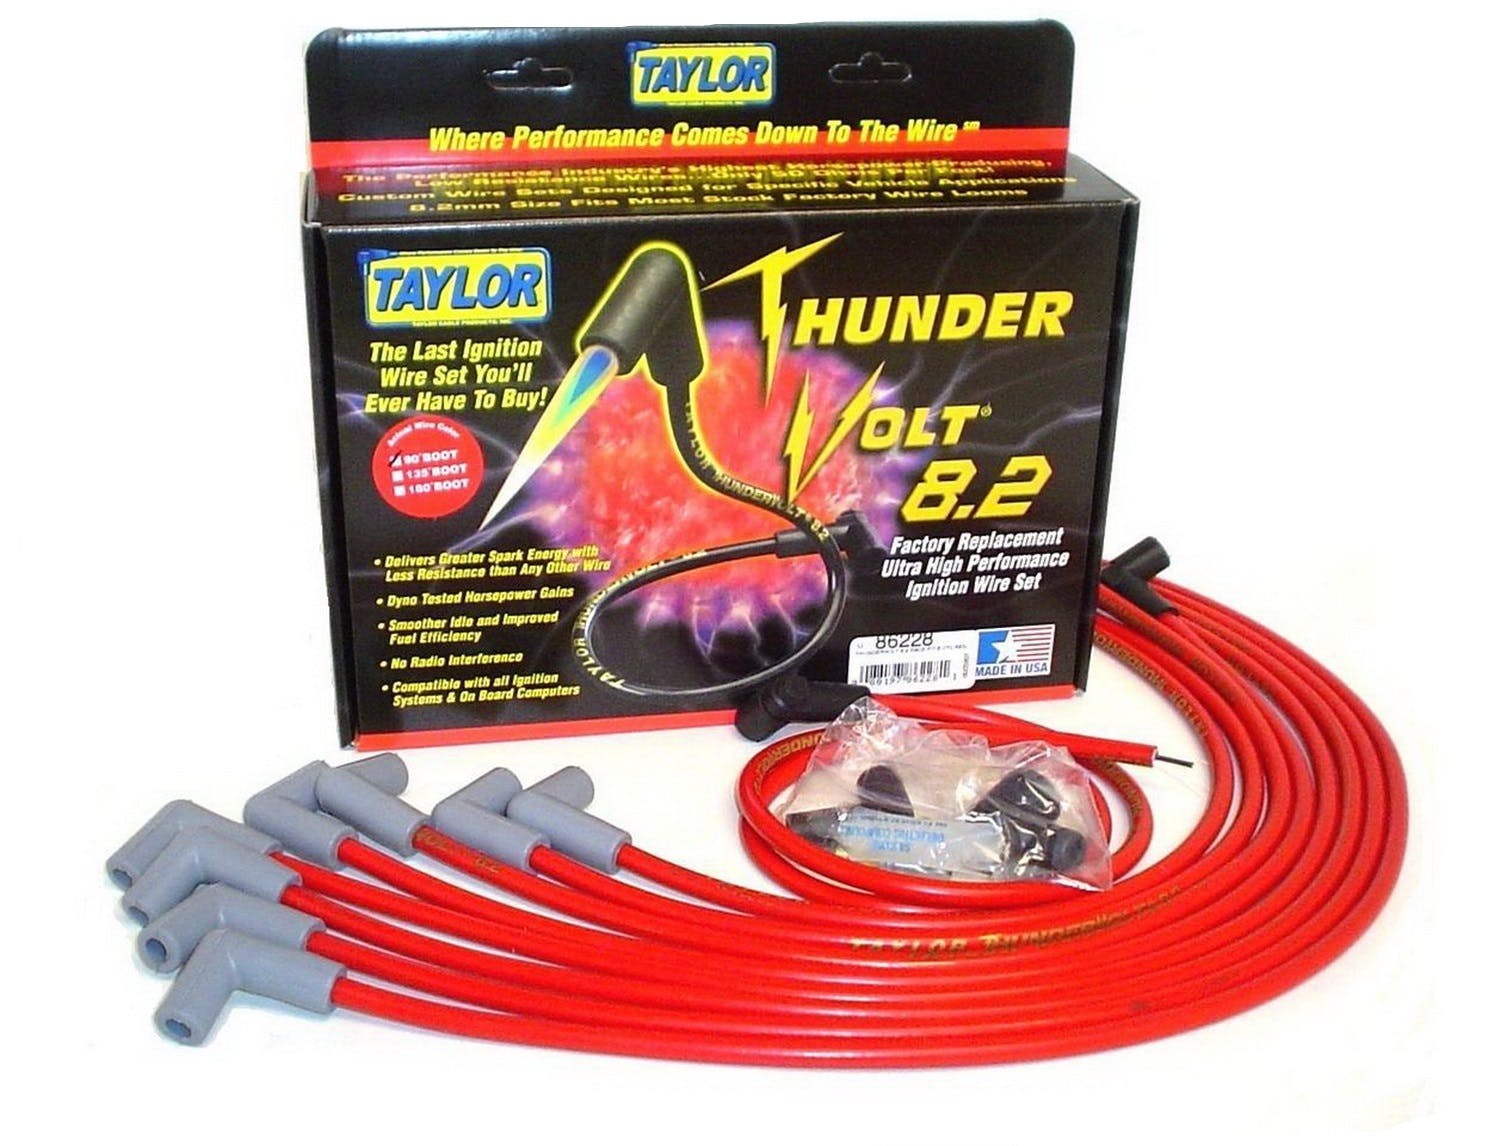 Taylor Cable Products 86228 Thundervolt 8.2 race fit 8 cyl red